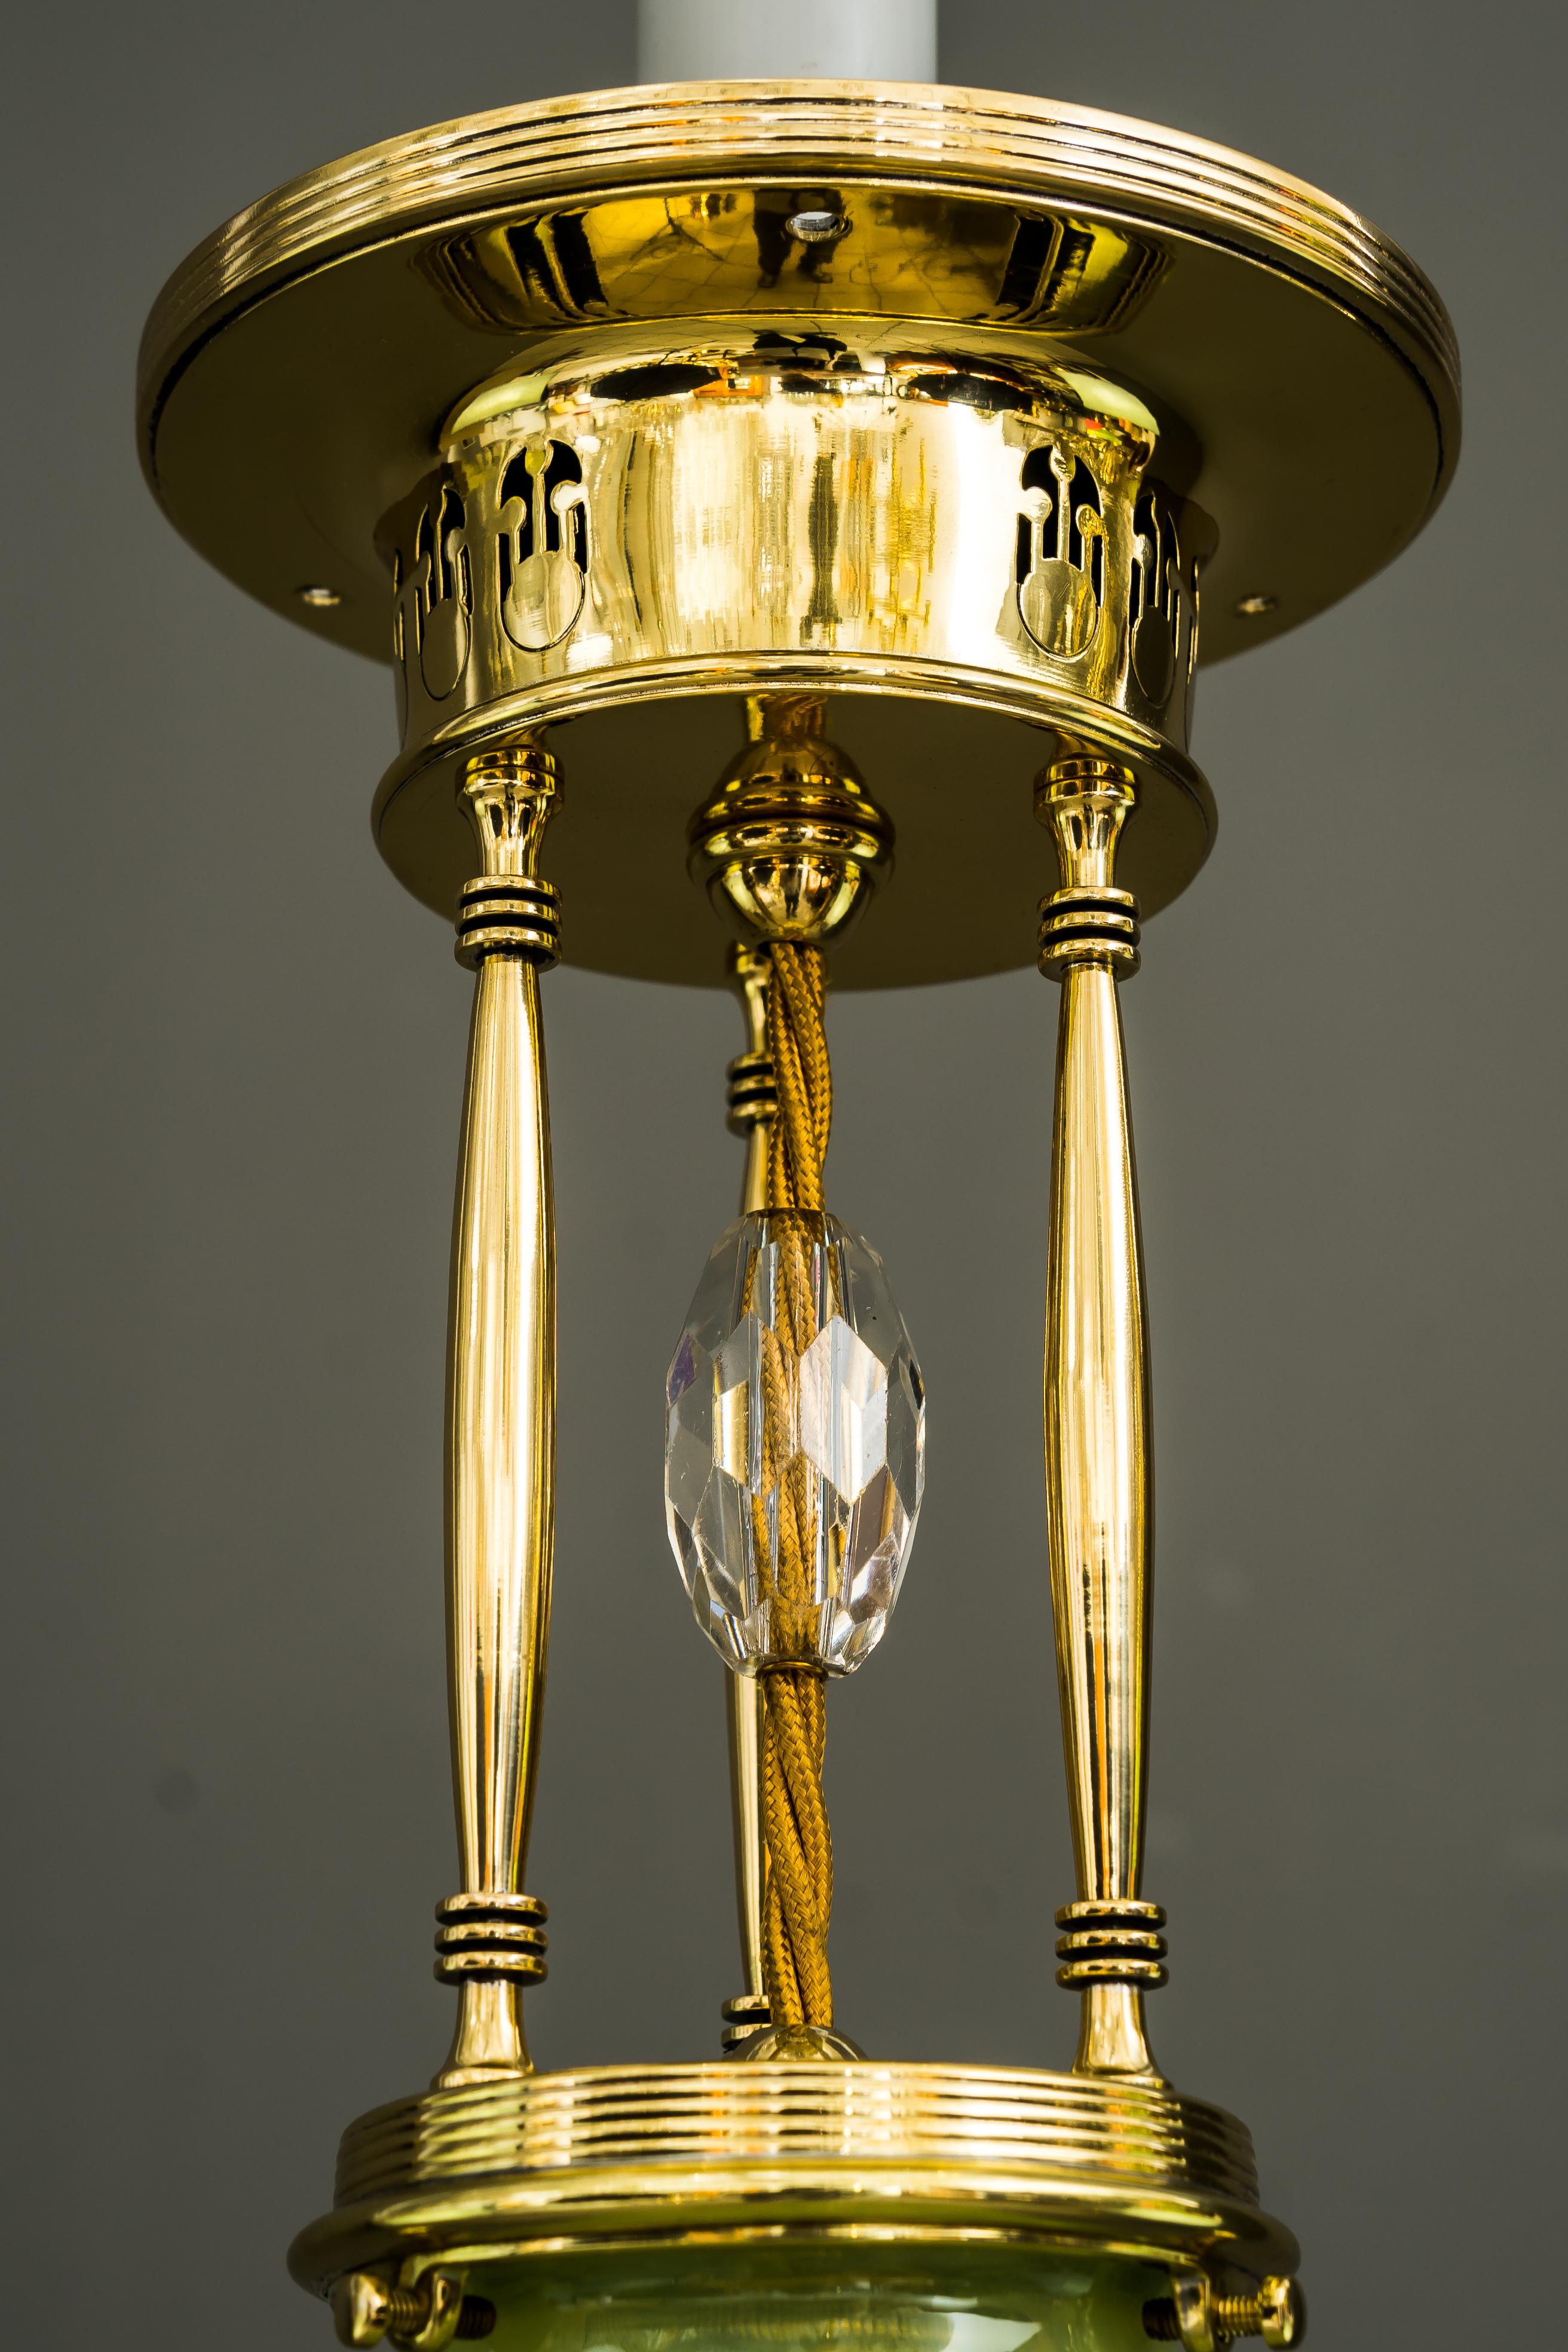 Art Deco ceiling lamp around 1920s with original opaline glass shade
Brass polished and stove enameled.